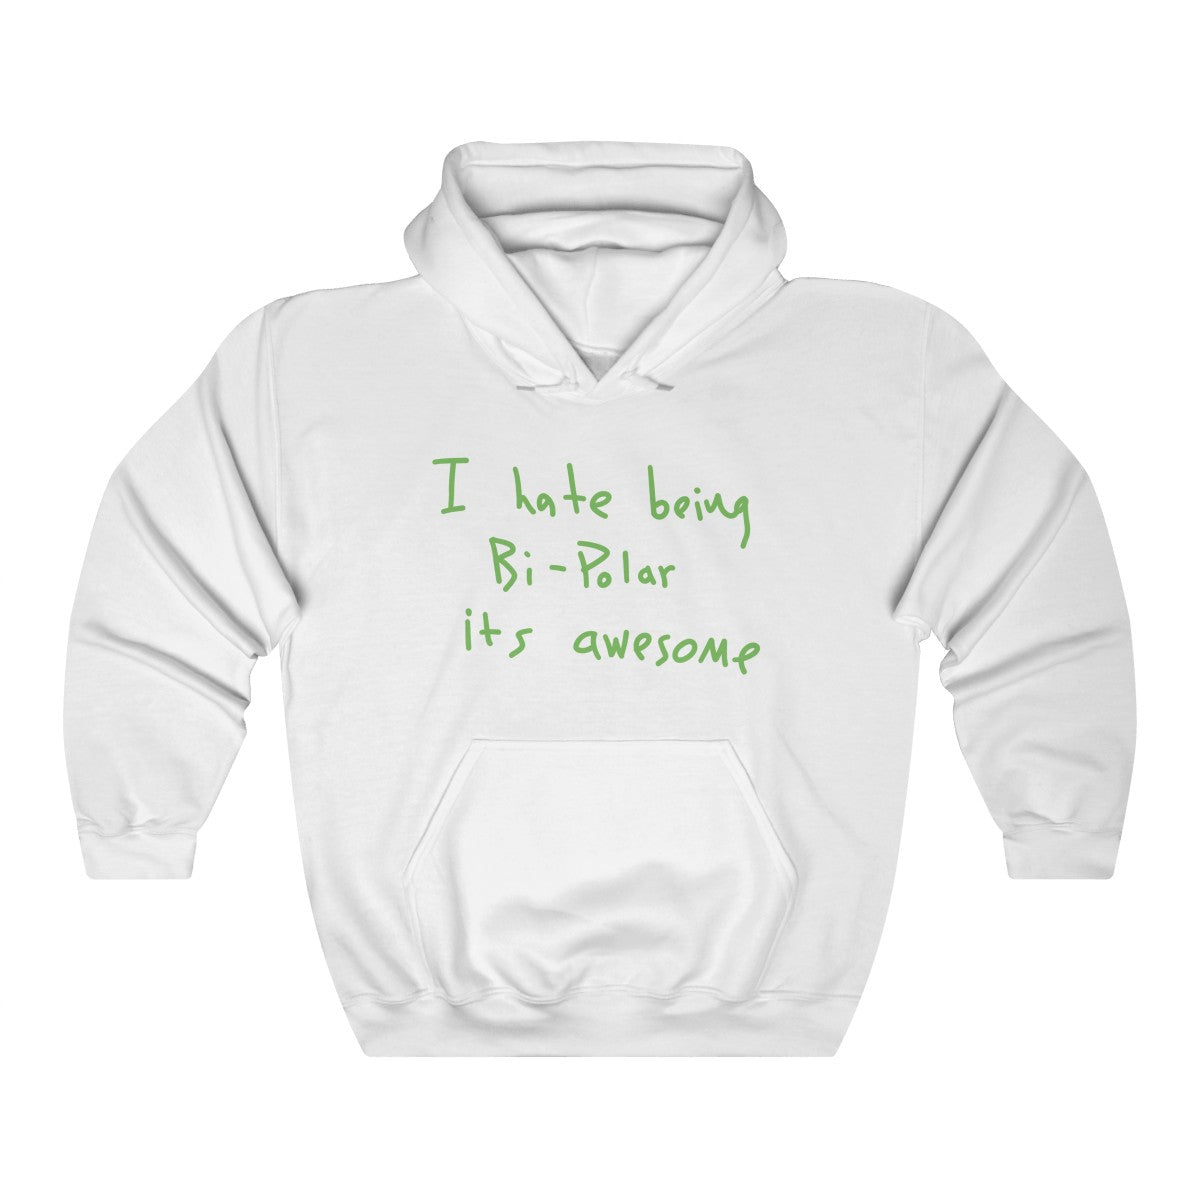 I hate being Bi-Polar it's awesome Kanye West inspired Heavy Blend™ Hoodie-White-S-Archethype